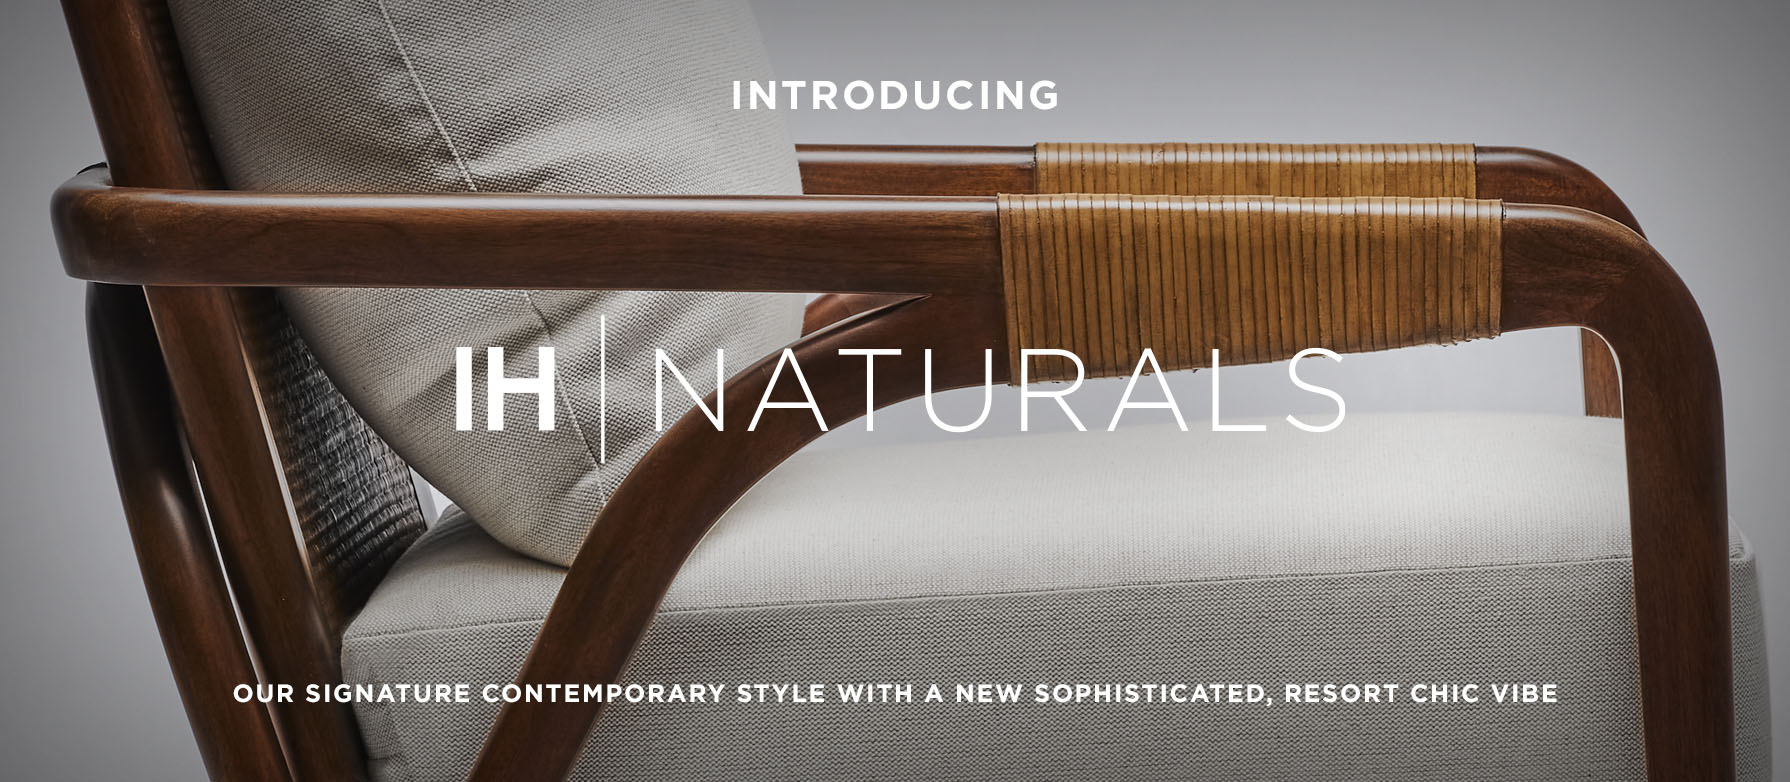 Modern Sophistication Meets Organic Beauty: Introducing the Naturals Collection